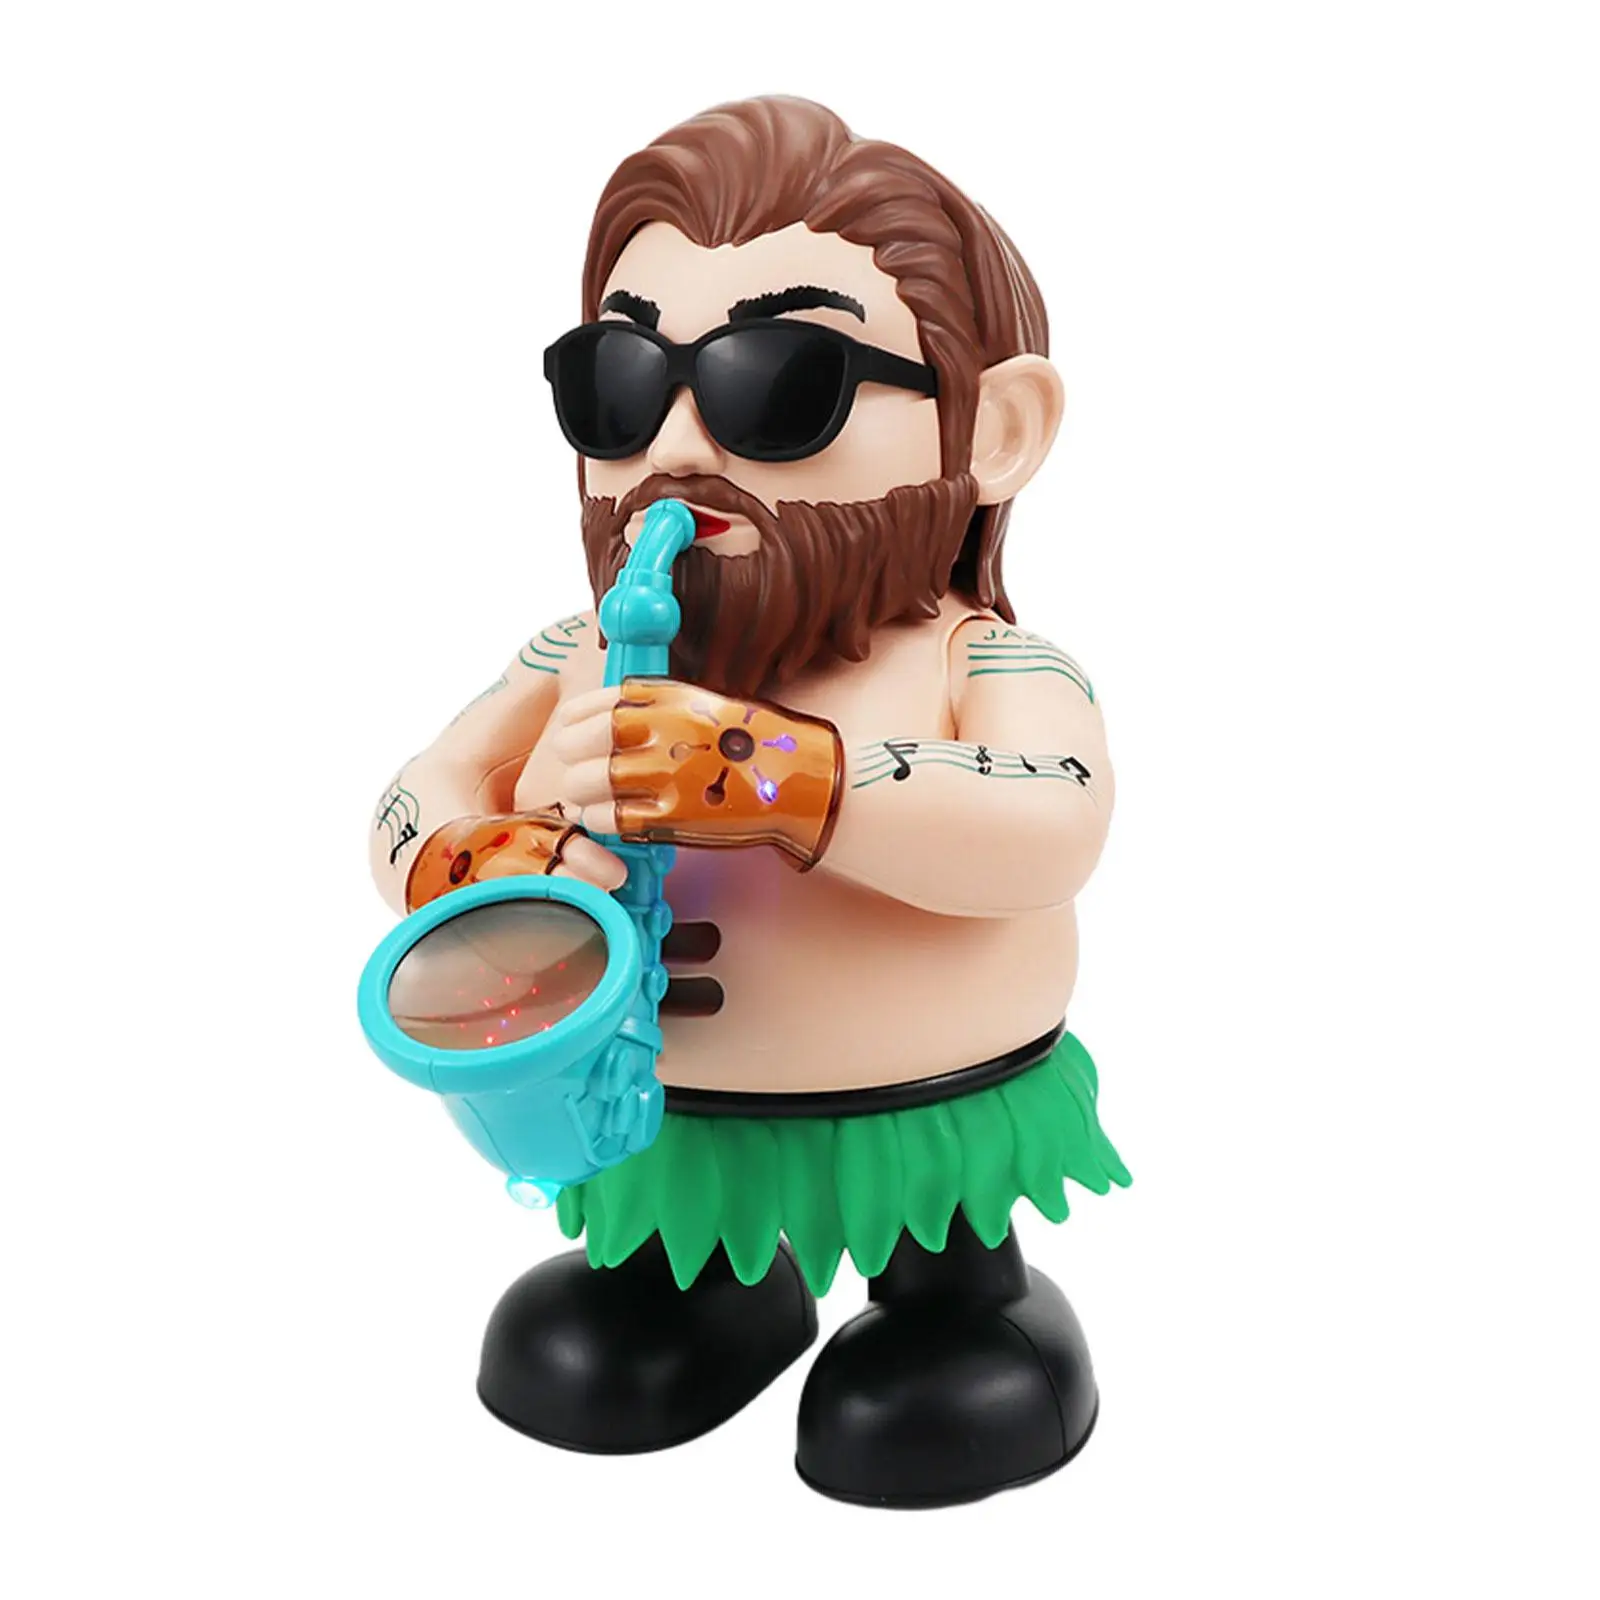 Funny Dancing Electric Saxophonist Toys with Dancing Music Electric Doll Musical Toys Learning Toy for Girls Kids Holiday Gifts